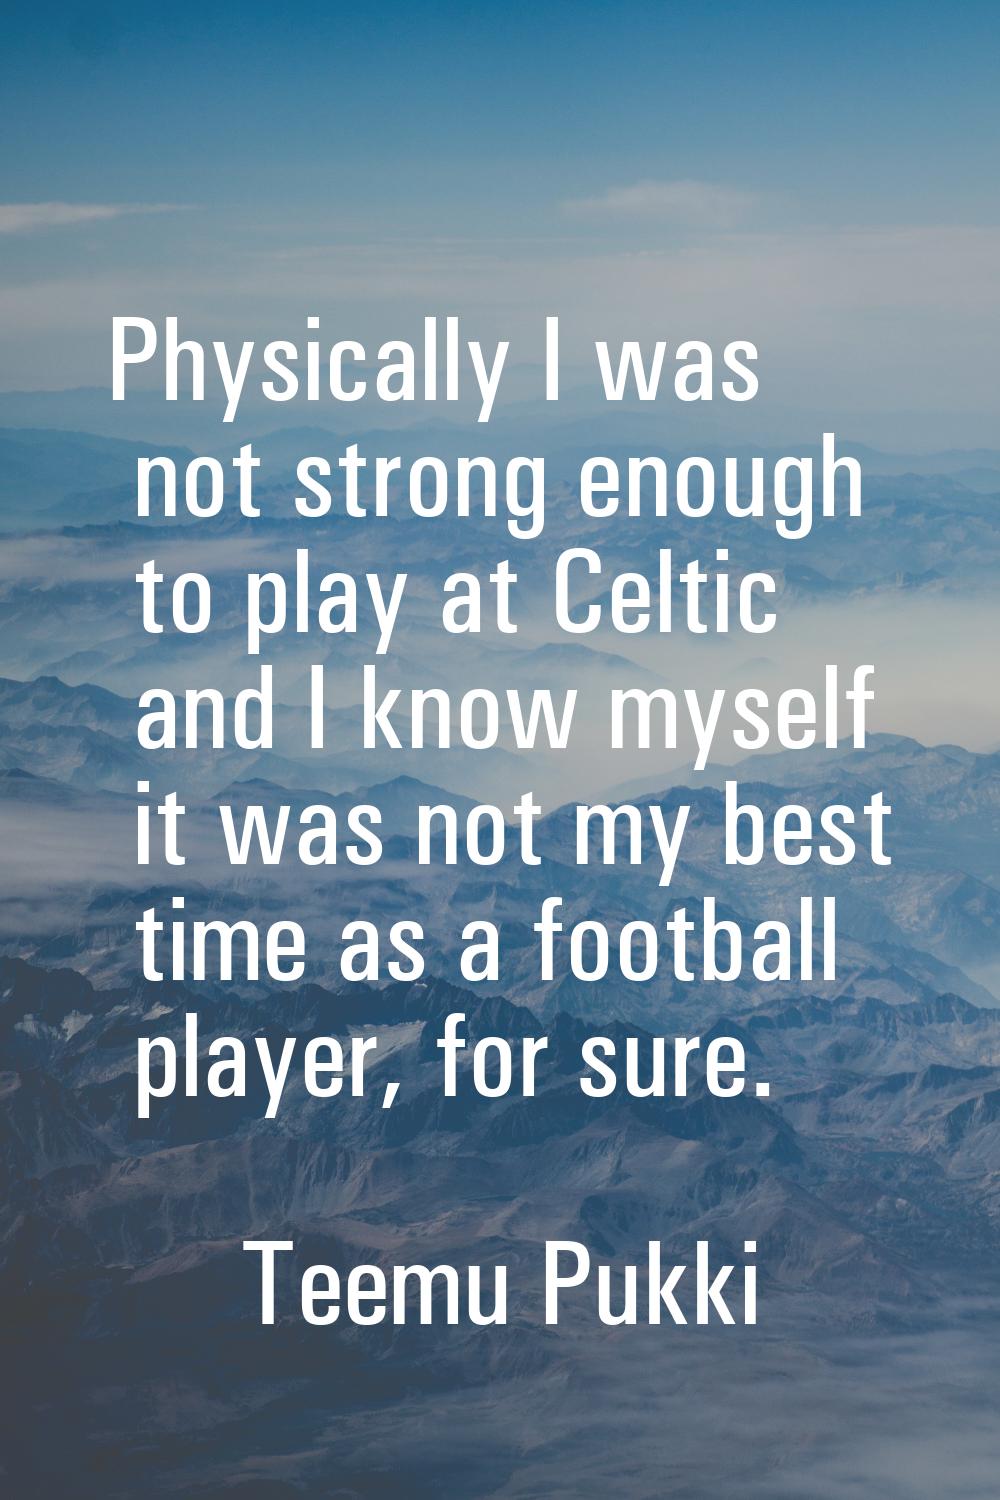 Physically I was not strong enough to play at Celtic and I know myself it was not my best time as a